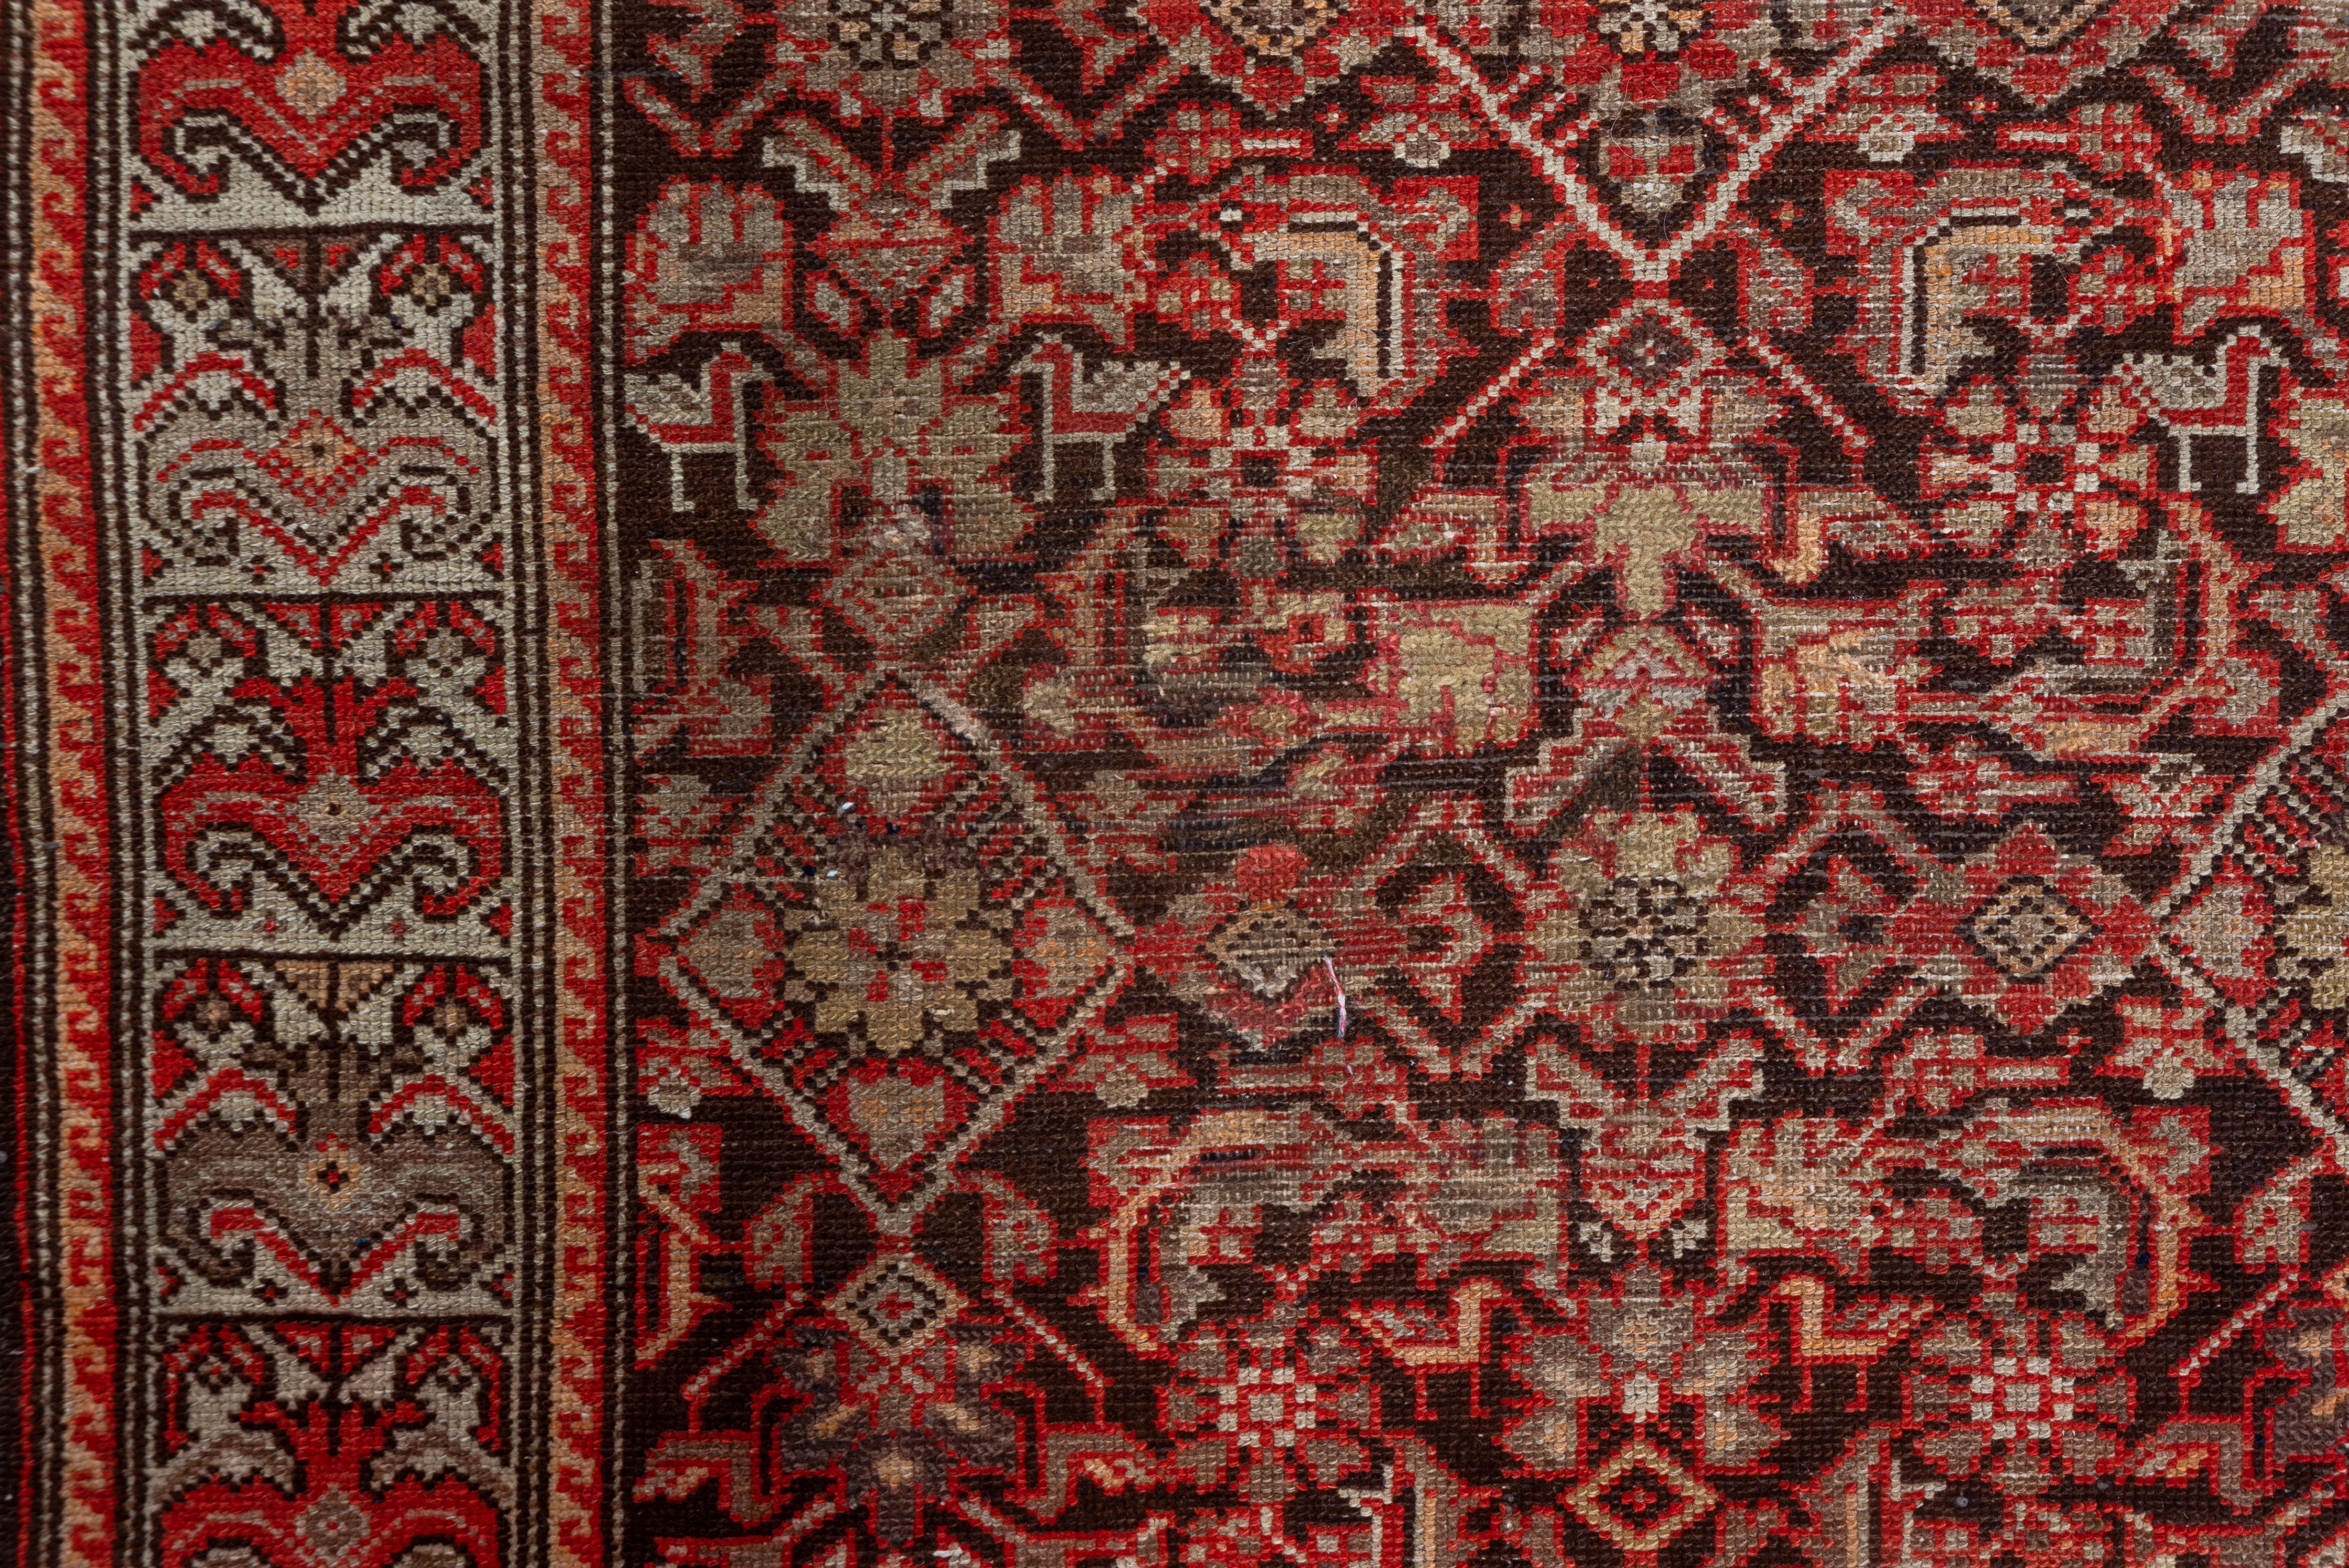 The abrashed sienna field shows a three column Herati allover Herati design with 